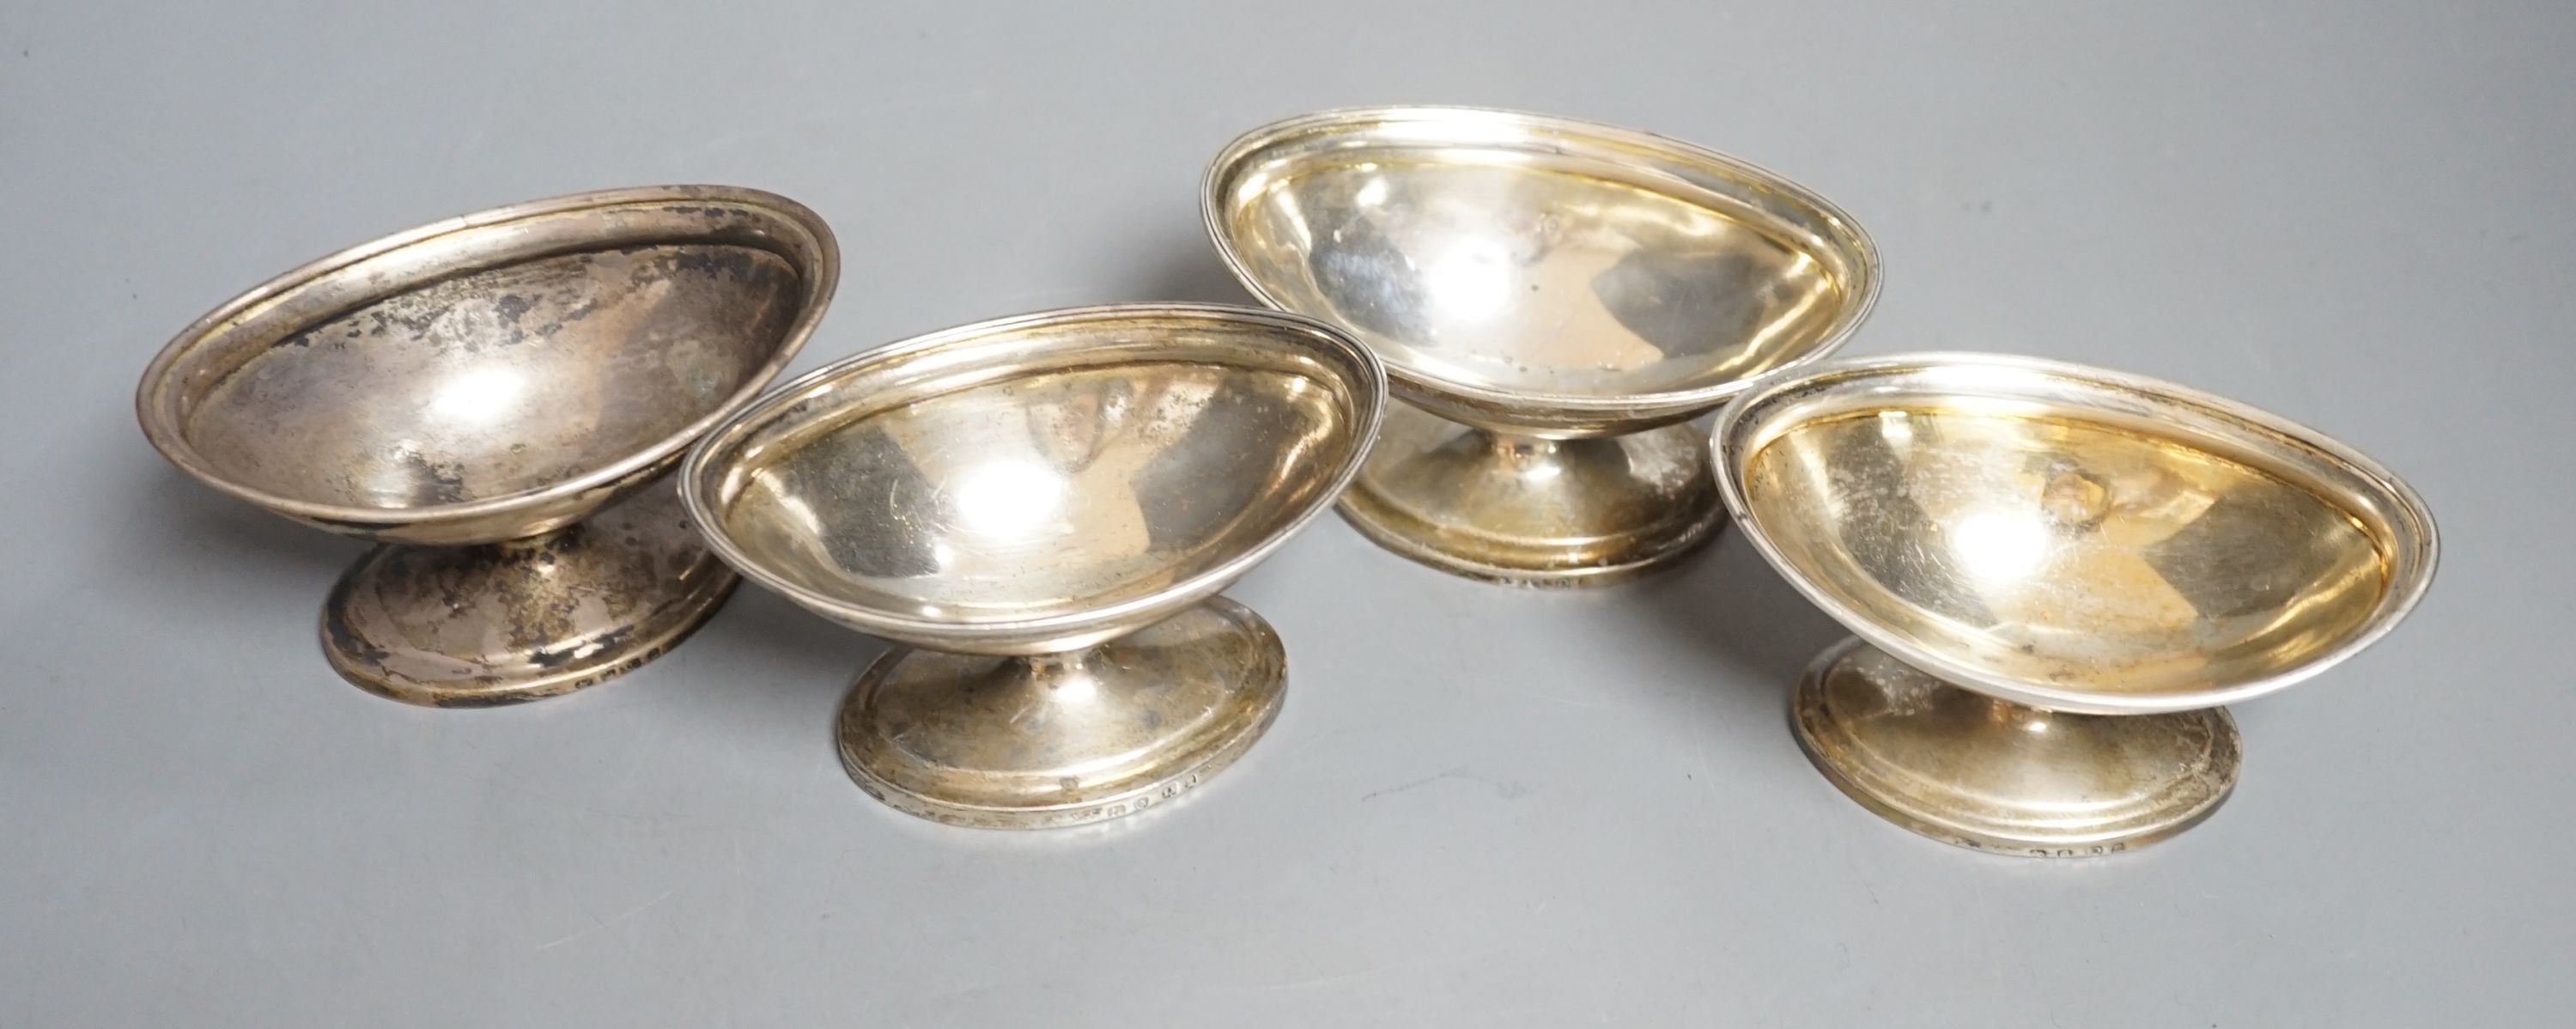 A set of four George III silver boat shaped pedestal salts, London, 1799, maker's mark rubbed, length 10cm, 345 grams.